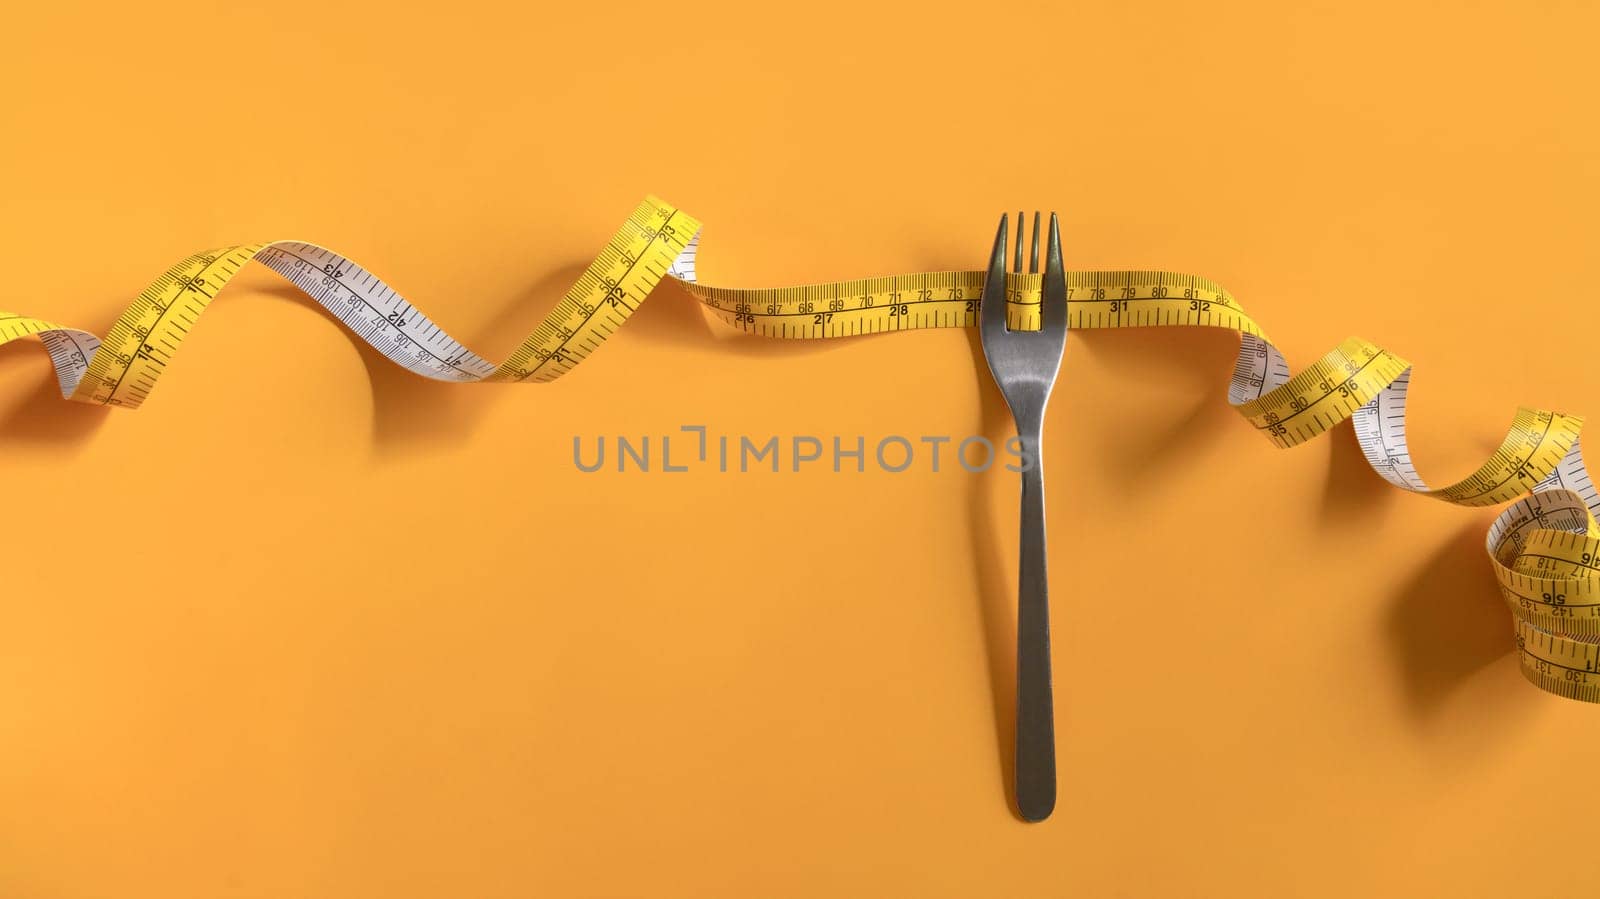 Fork with measuring tape on yellow background. Weight loss and healthy lifestyle concept.